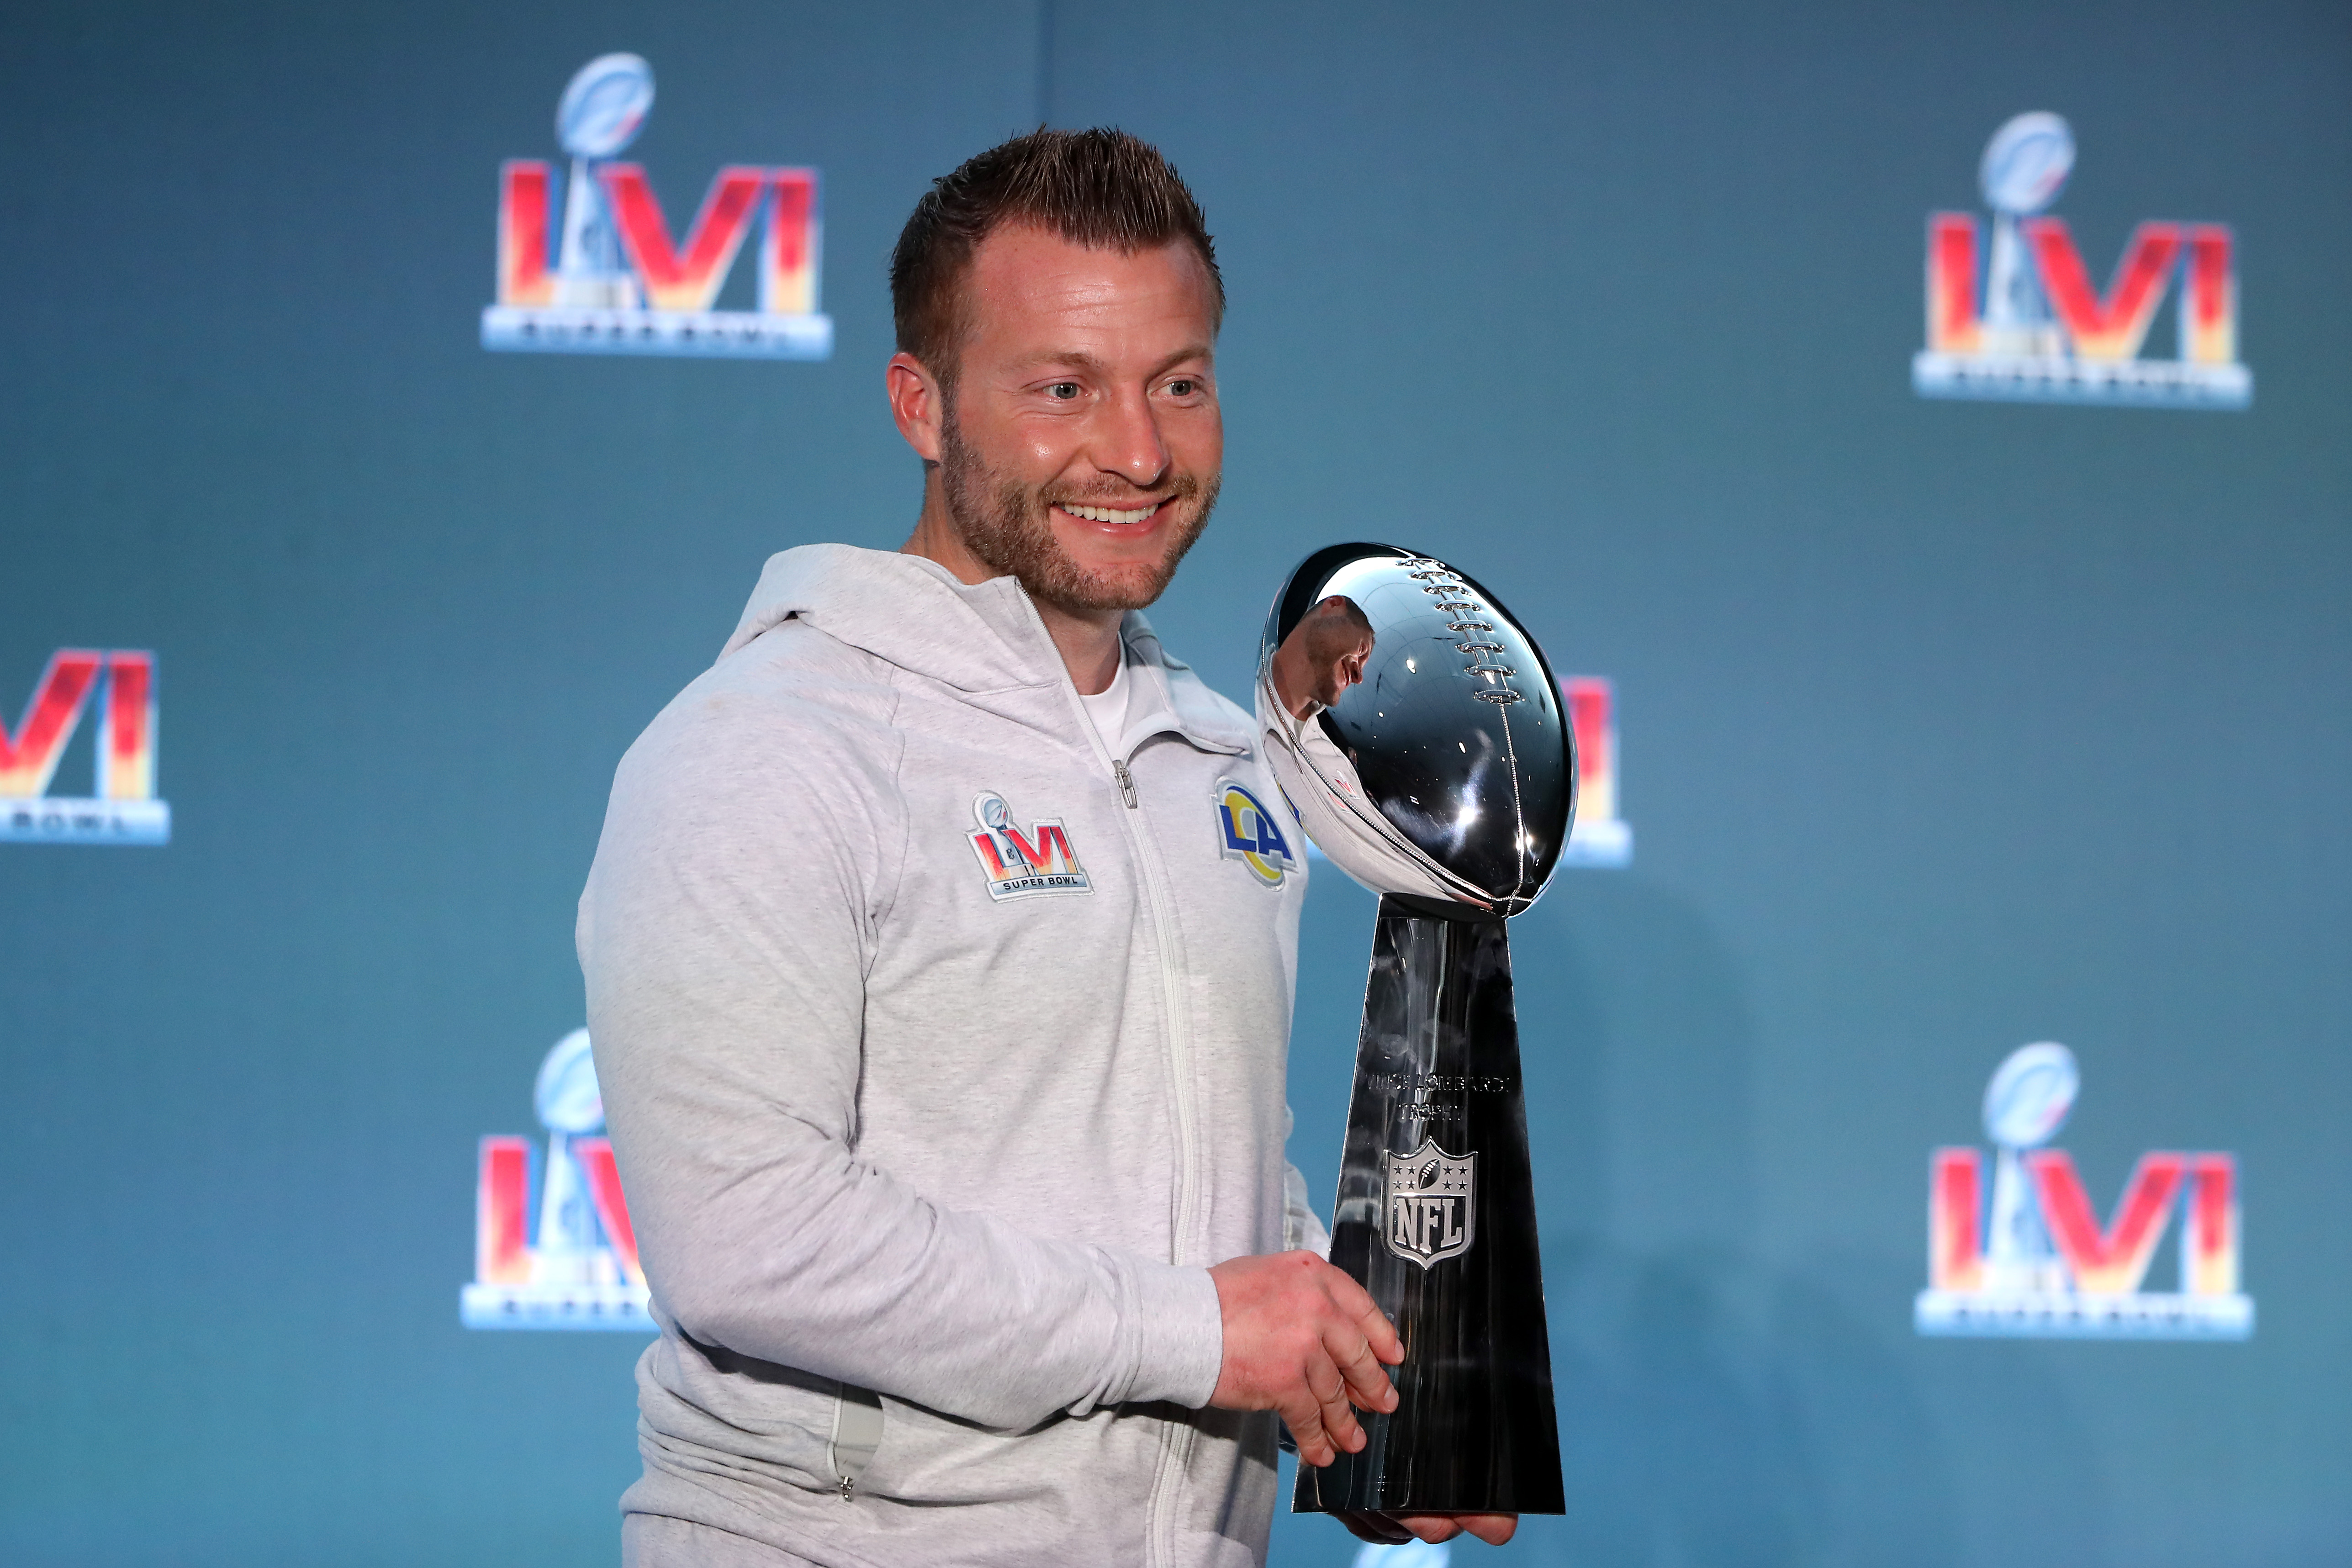 Rams head coach Sean McVay poses for photo after winning Super Bowl